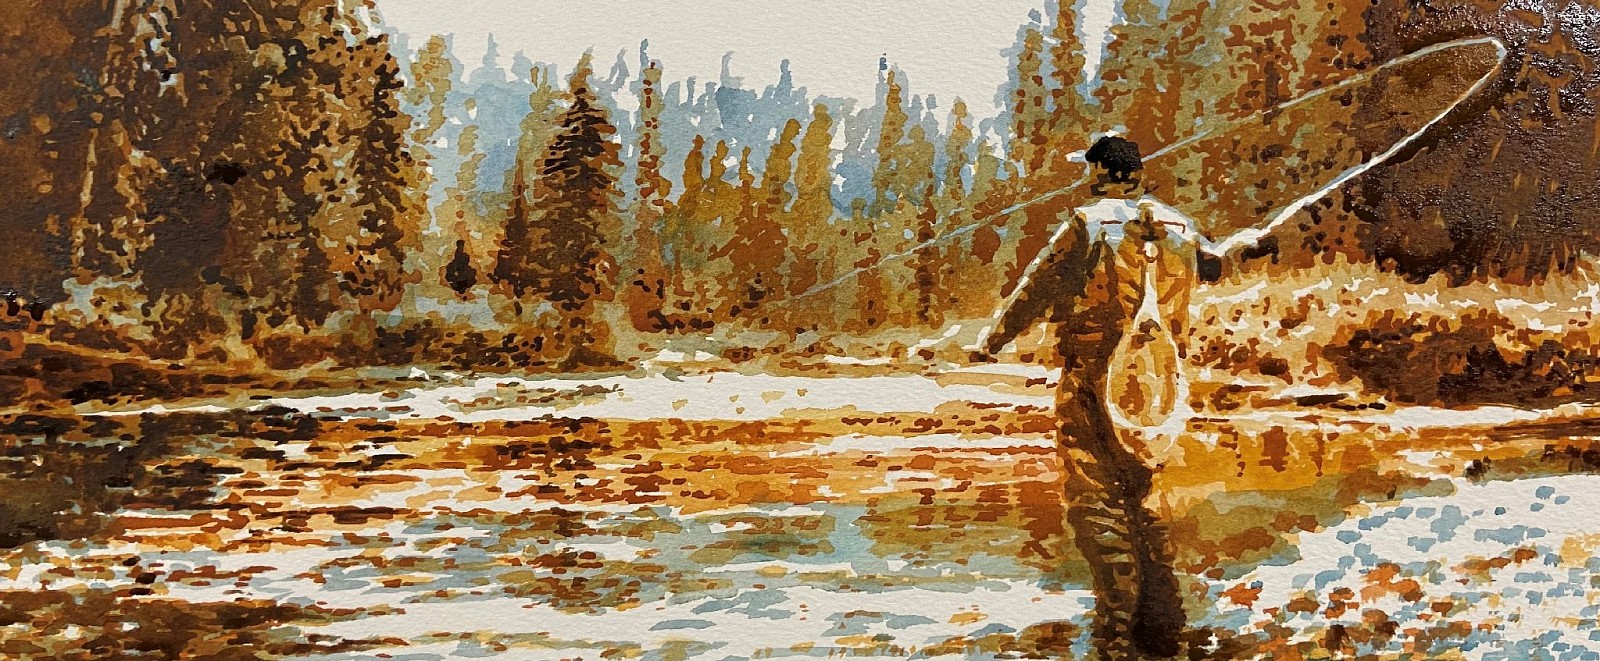 Jeremy Houghton, Fly Fishing, 2020
Watercolor, 8 x 16 in.
SOLD
7483